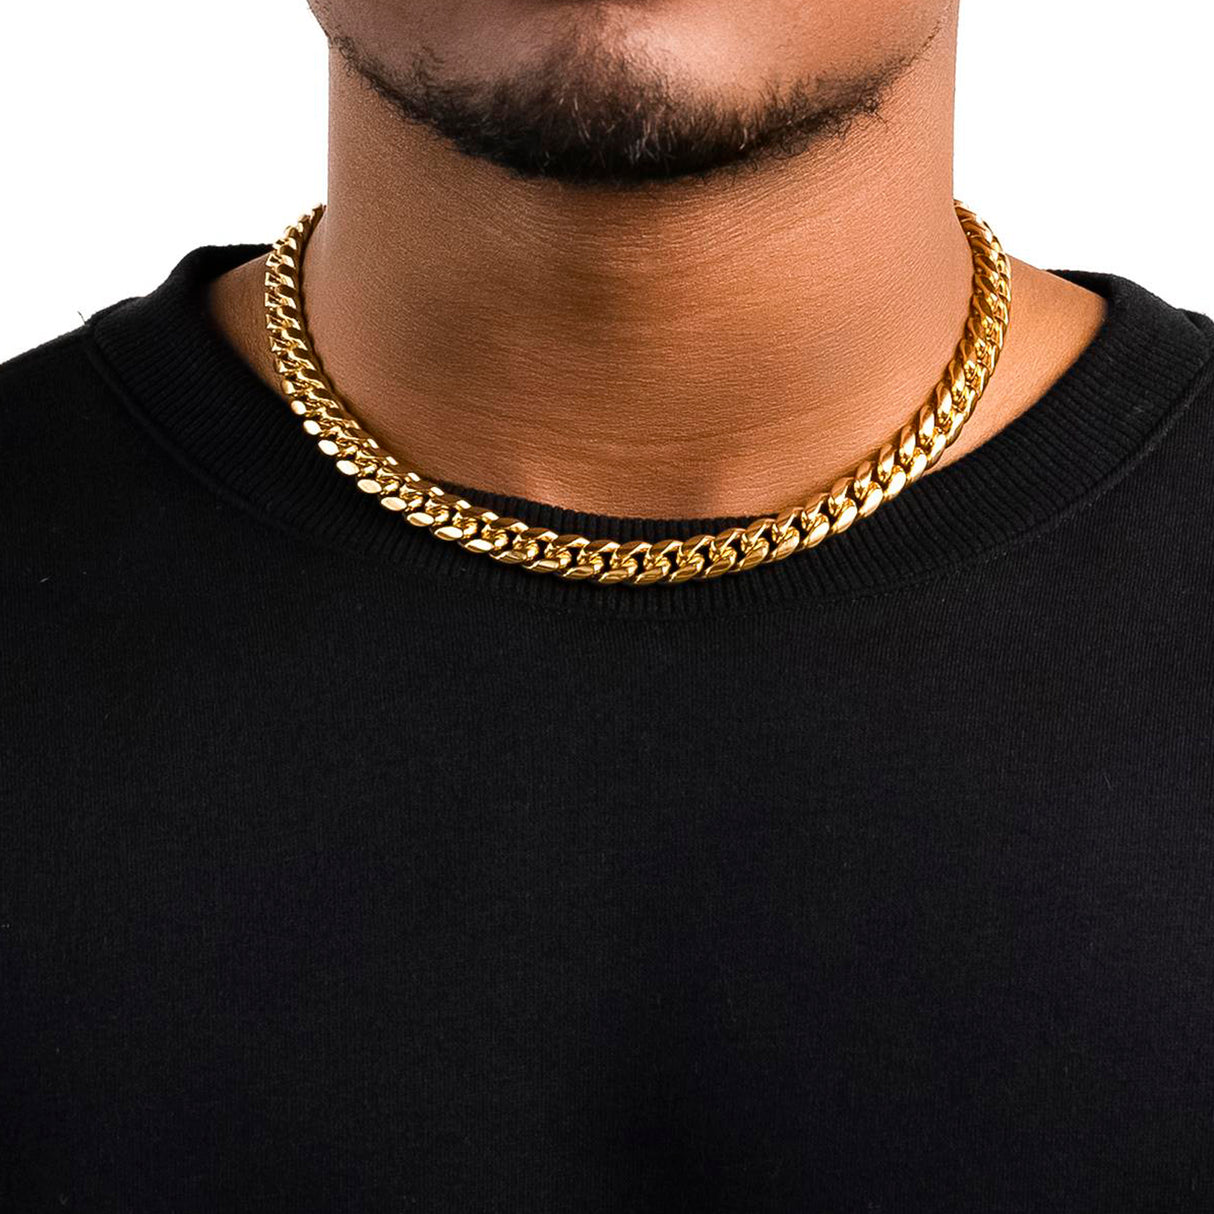 the-gold-gods-mens-jewelry-18k-gold-plated-miami-cuban-link-necklace-10mm-18inch